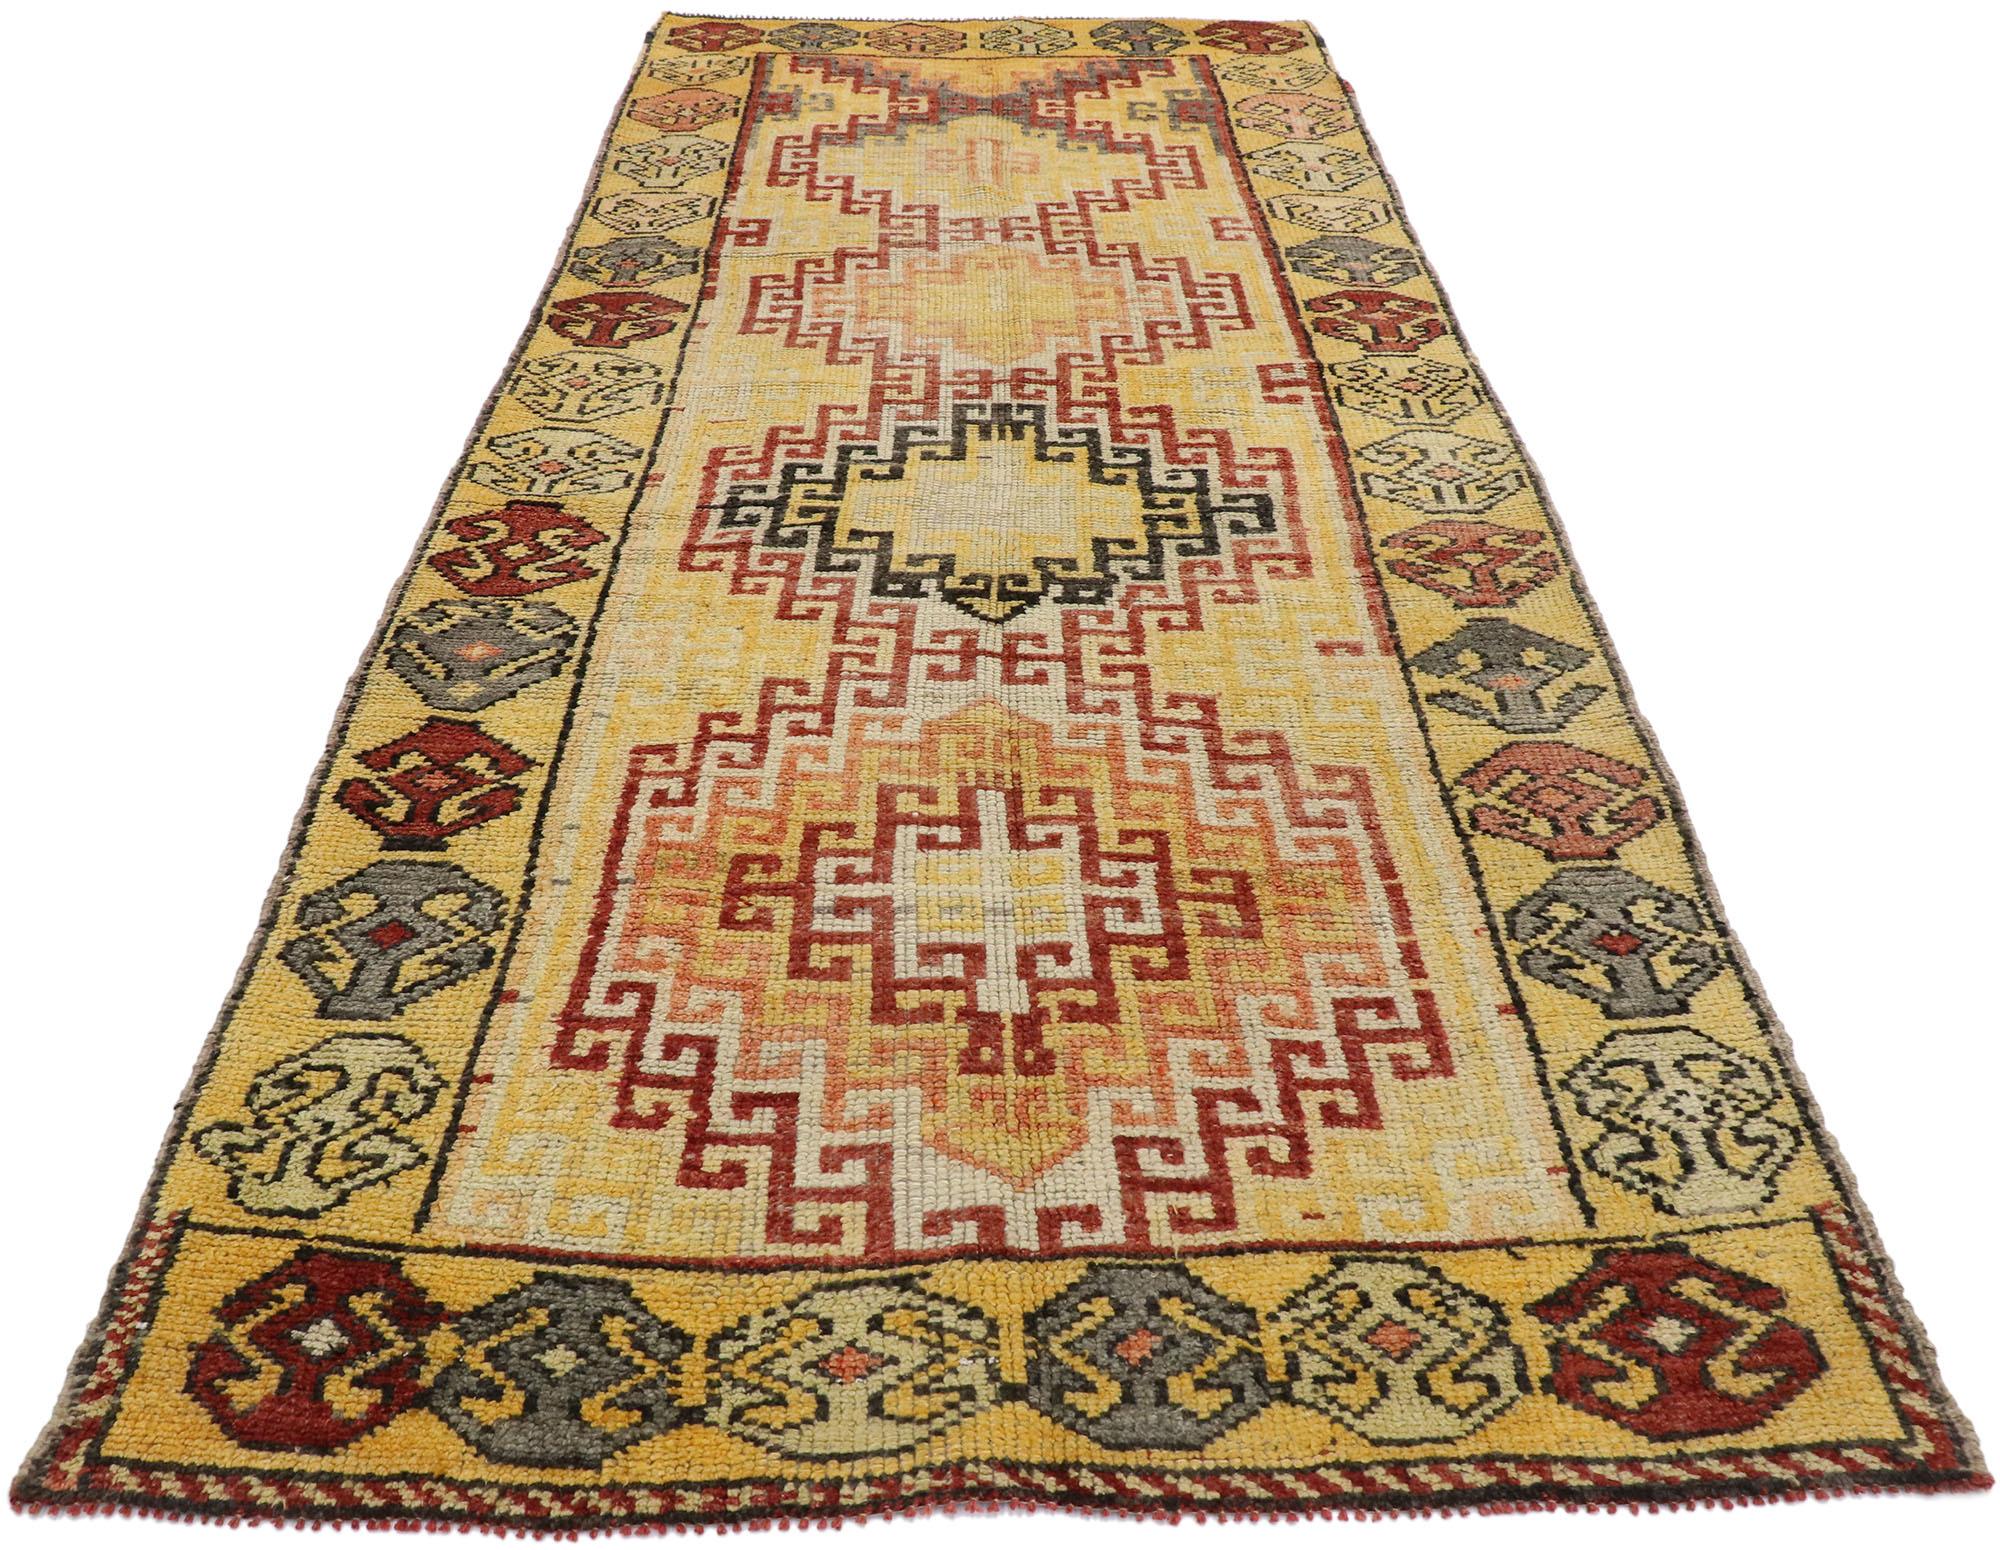 Vintage Turkish Oushak Runner with Mid-Century Modern Style In Good Condition For Sale In Dallas, TX